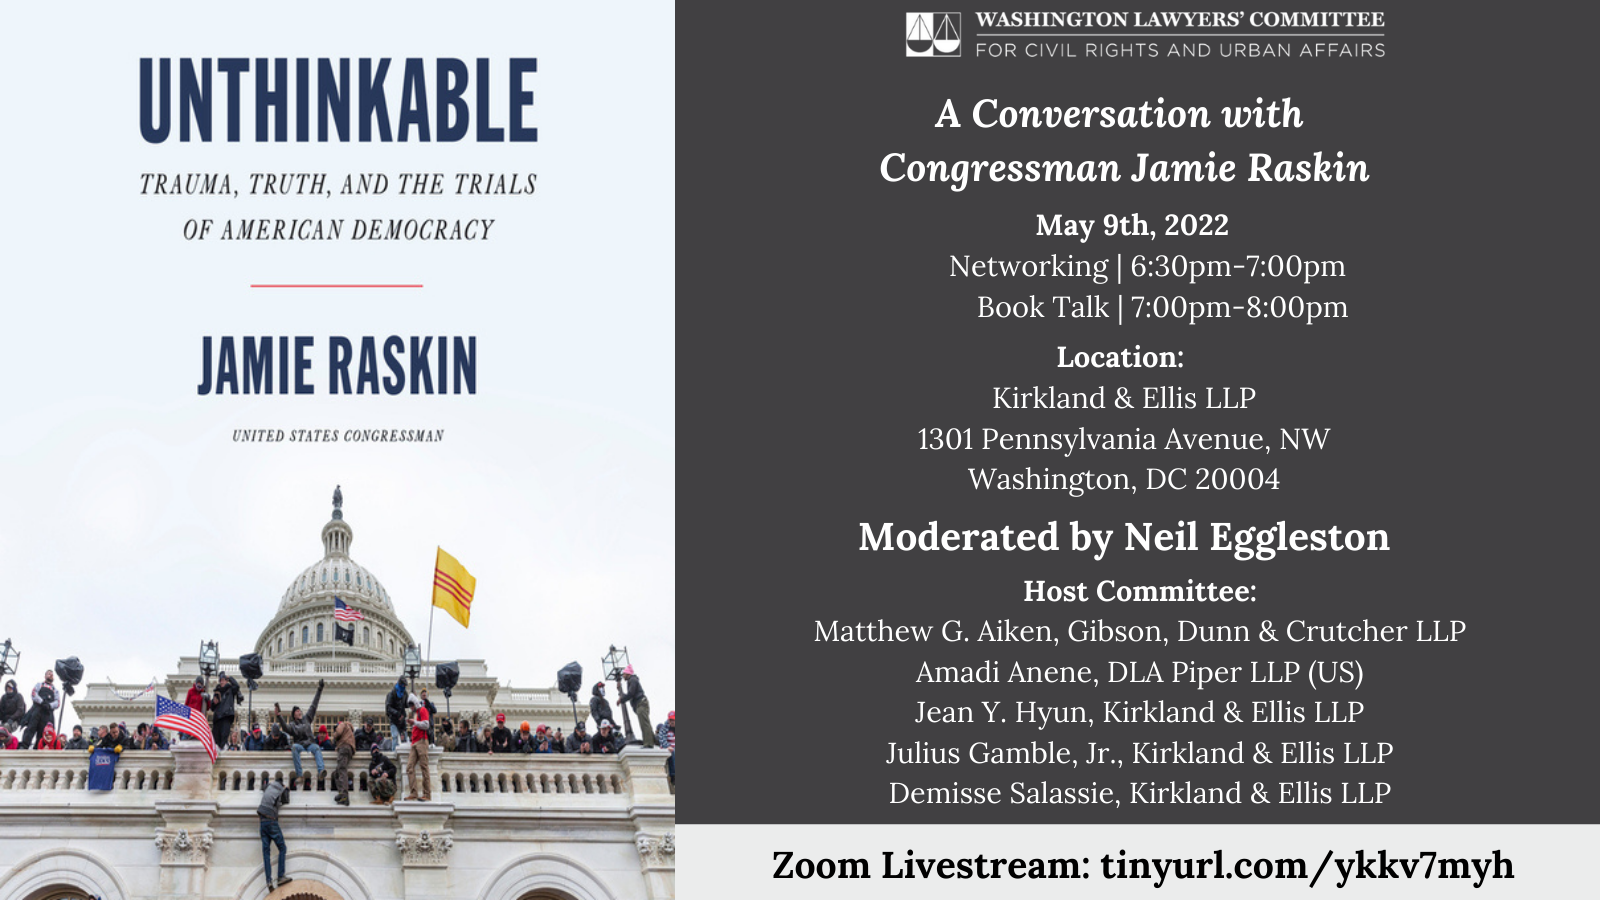 Book Cover with text that reads "Unthinkable Trauma, Truth, and the Trials of American Democracy Jamie Raskin United States Congressman" with a light sky blue background and a photograph of the US Congress building during the January 6, 2020 insurrection showing people climbing over the building holding